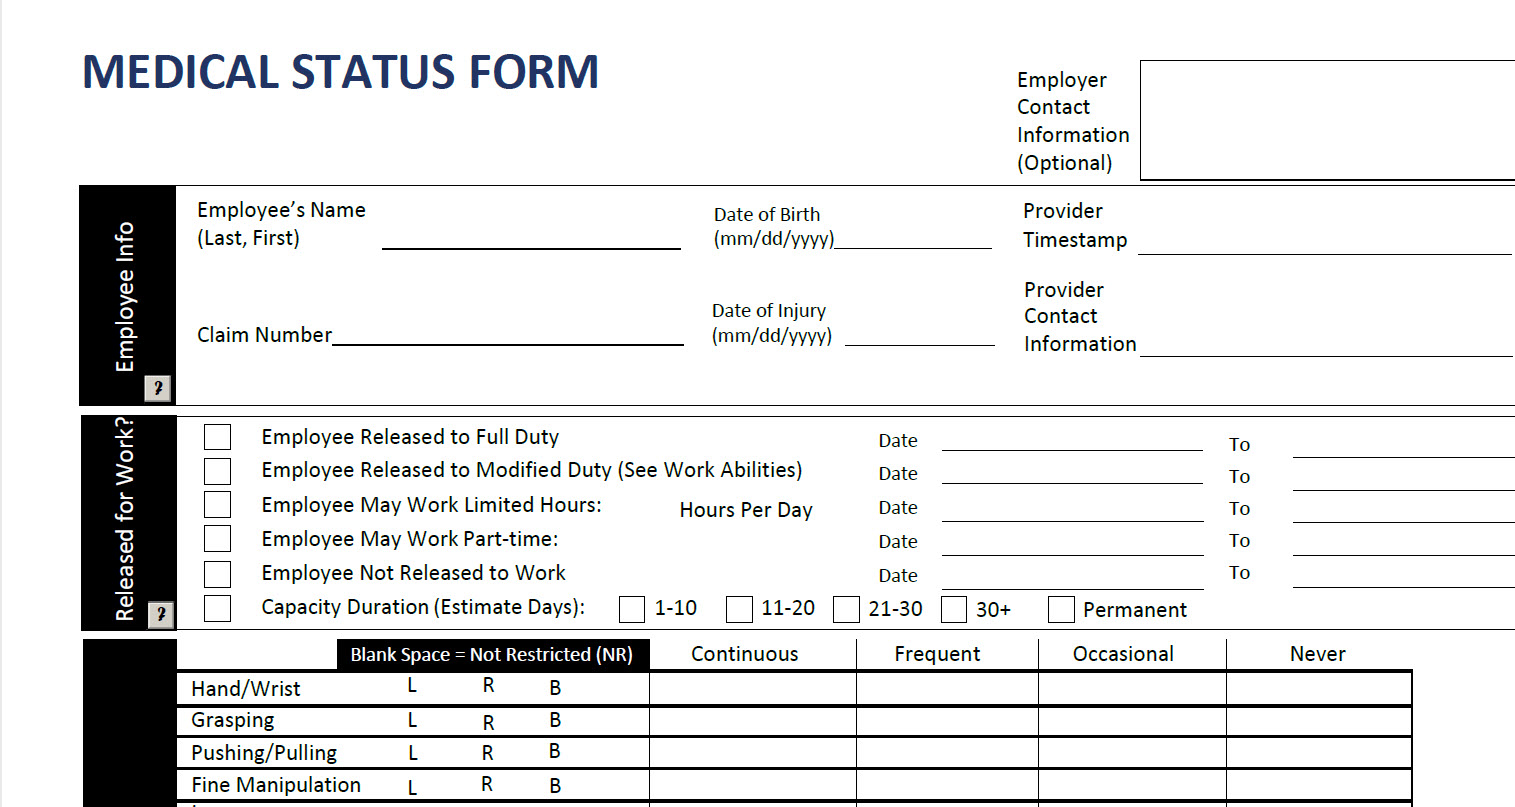 The Purpose of the Medical Status Form